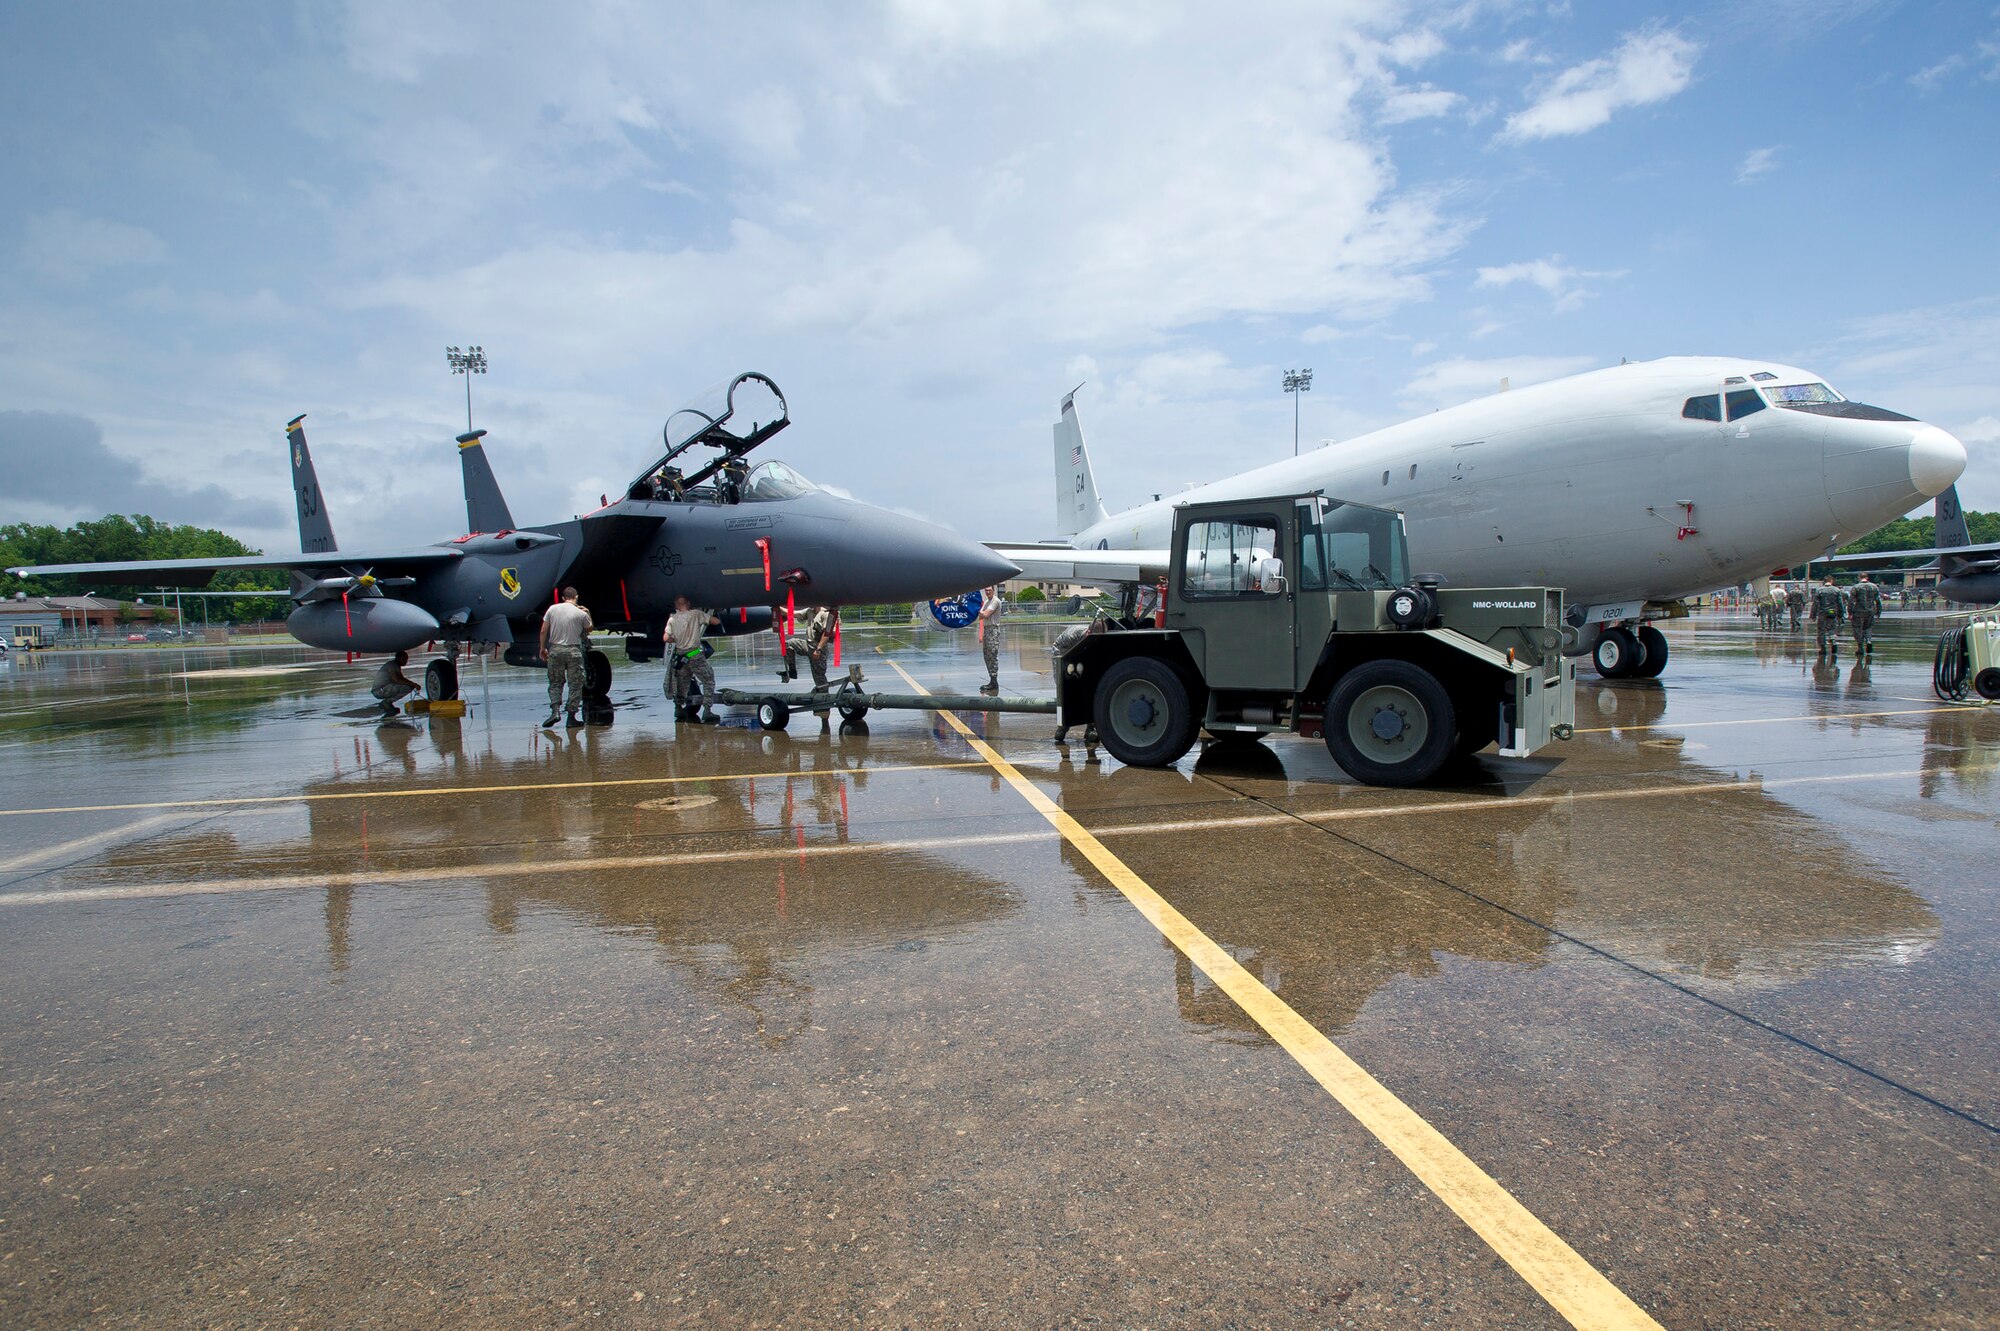 F-15E Strike Eagle crew chiefs from the 4th Fighter Wing, Seymour Johnson, N.C., position their jet next to an E-8 Joint STARS, Robins Air Force Base, Ga., June 10, 2012.  The 4th Fighter Wing was at Robins to participate in exercise Iron Dagger 2012 with Team JSTARS.  Prior to the start of the exercise, one E-8 and two F-15Es were set up for a group photo to commemorate the exercise.
(National Guard photo by Master Sgt. Roger Parsons/Released)
